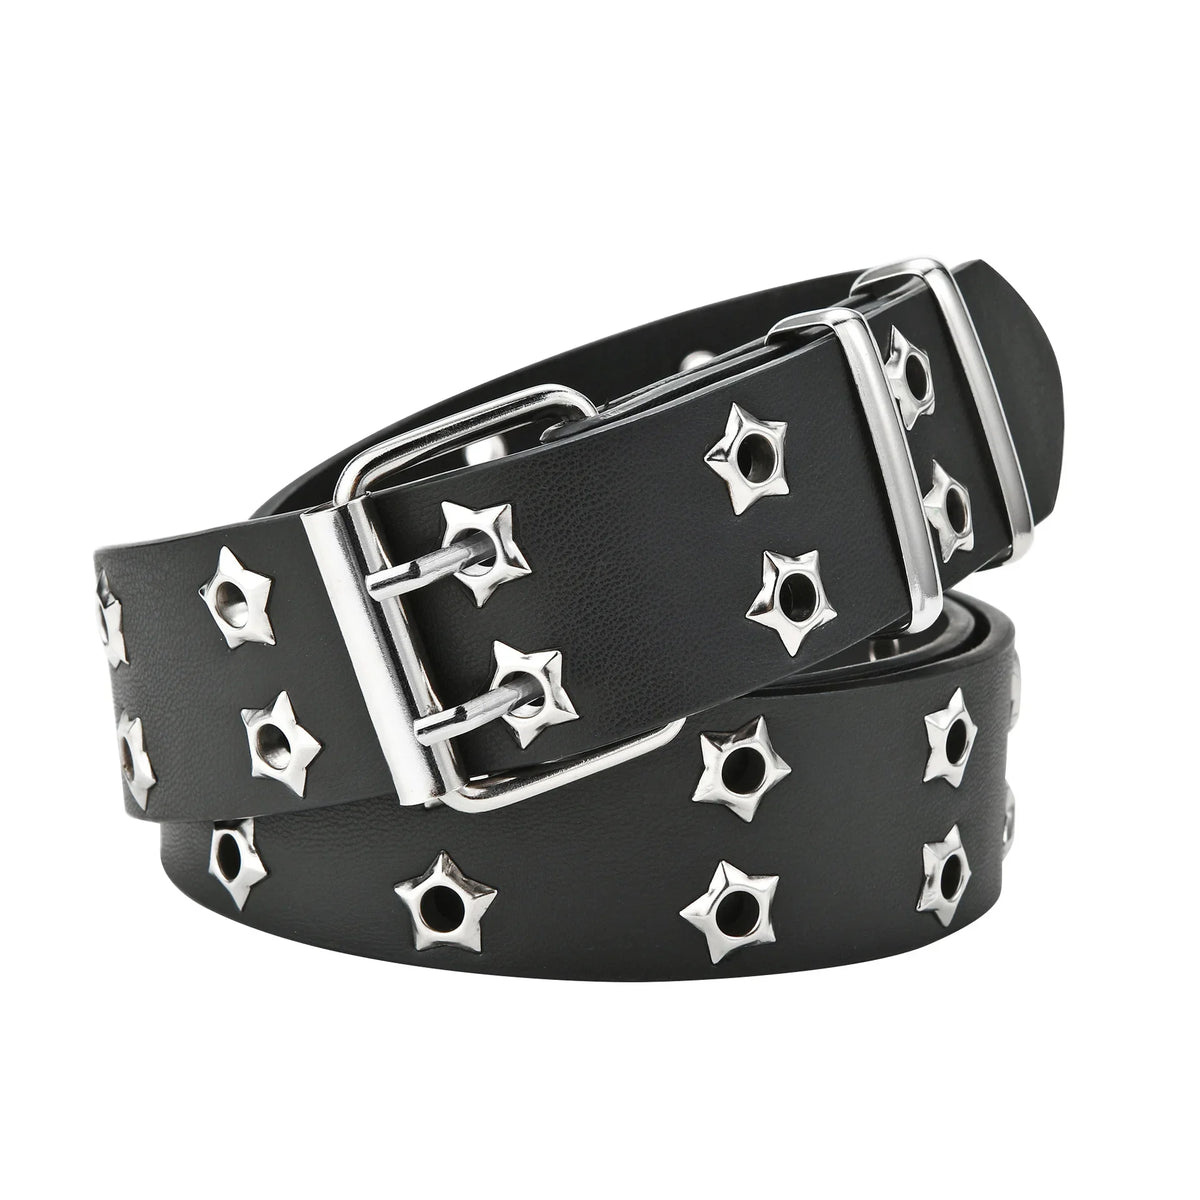 Star Eye Rivet Belt: Gothic Double Pin Buckle, Unisex Fashion Statement in Casual Punk Style PU Leather, Perfect Waistband for Youthful Jeans Wear